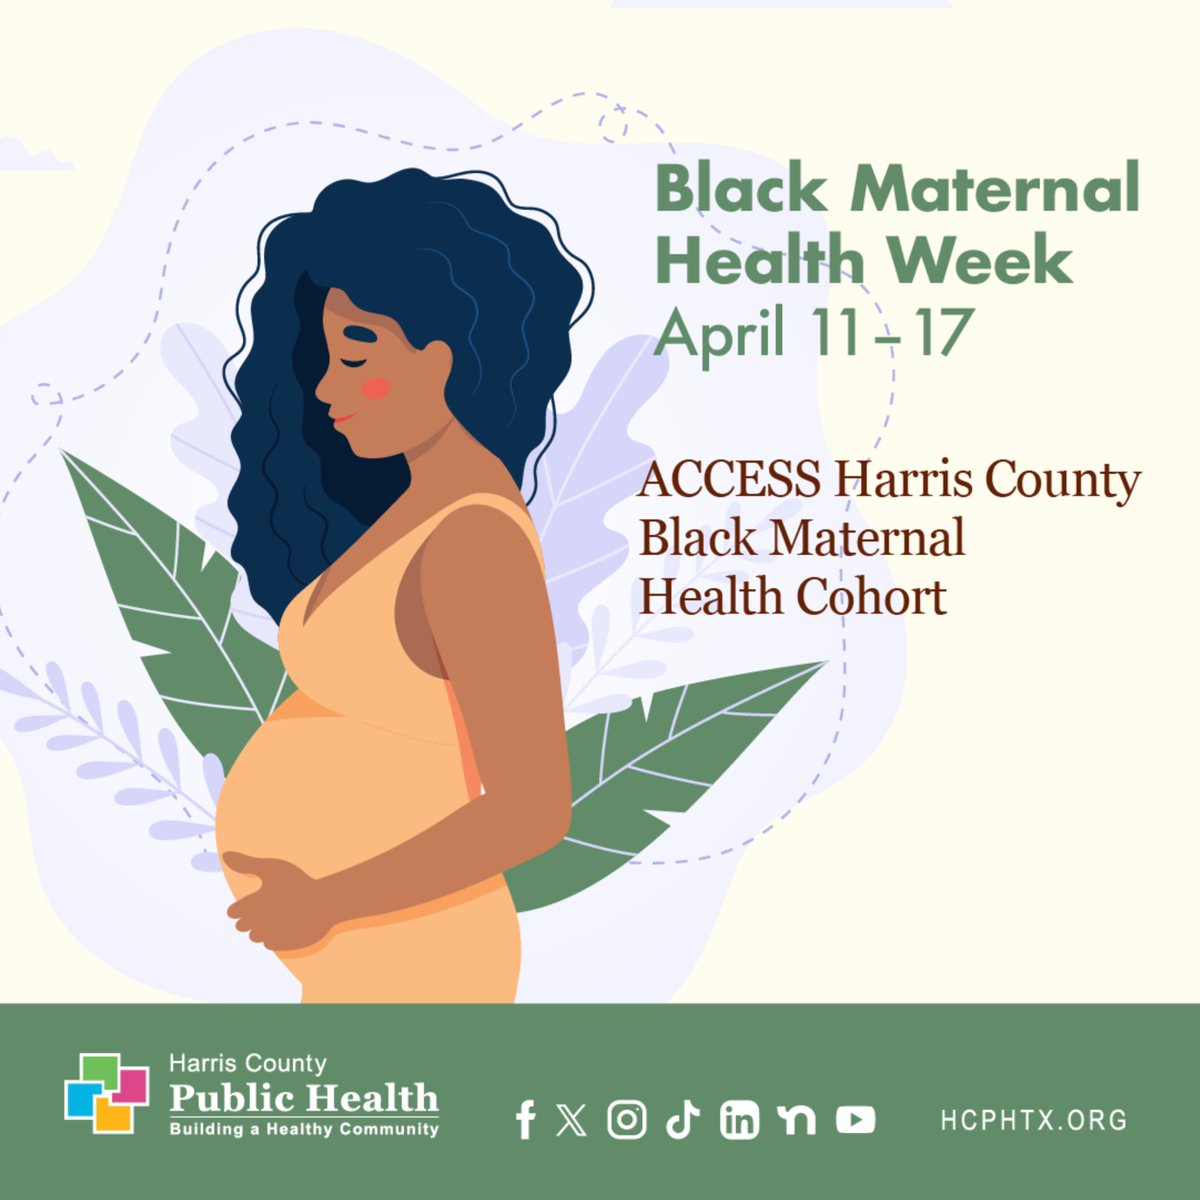 Did you know? Black birthing persons face higher risks during delivery and infant loss. The ACCESS Harris County Black Maternal Health Cohort works to reduce these risks, raise awareness, and empower Black birthing persons. Visit hcphtx.org/access.